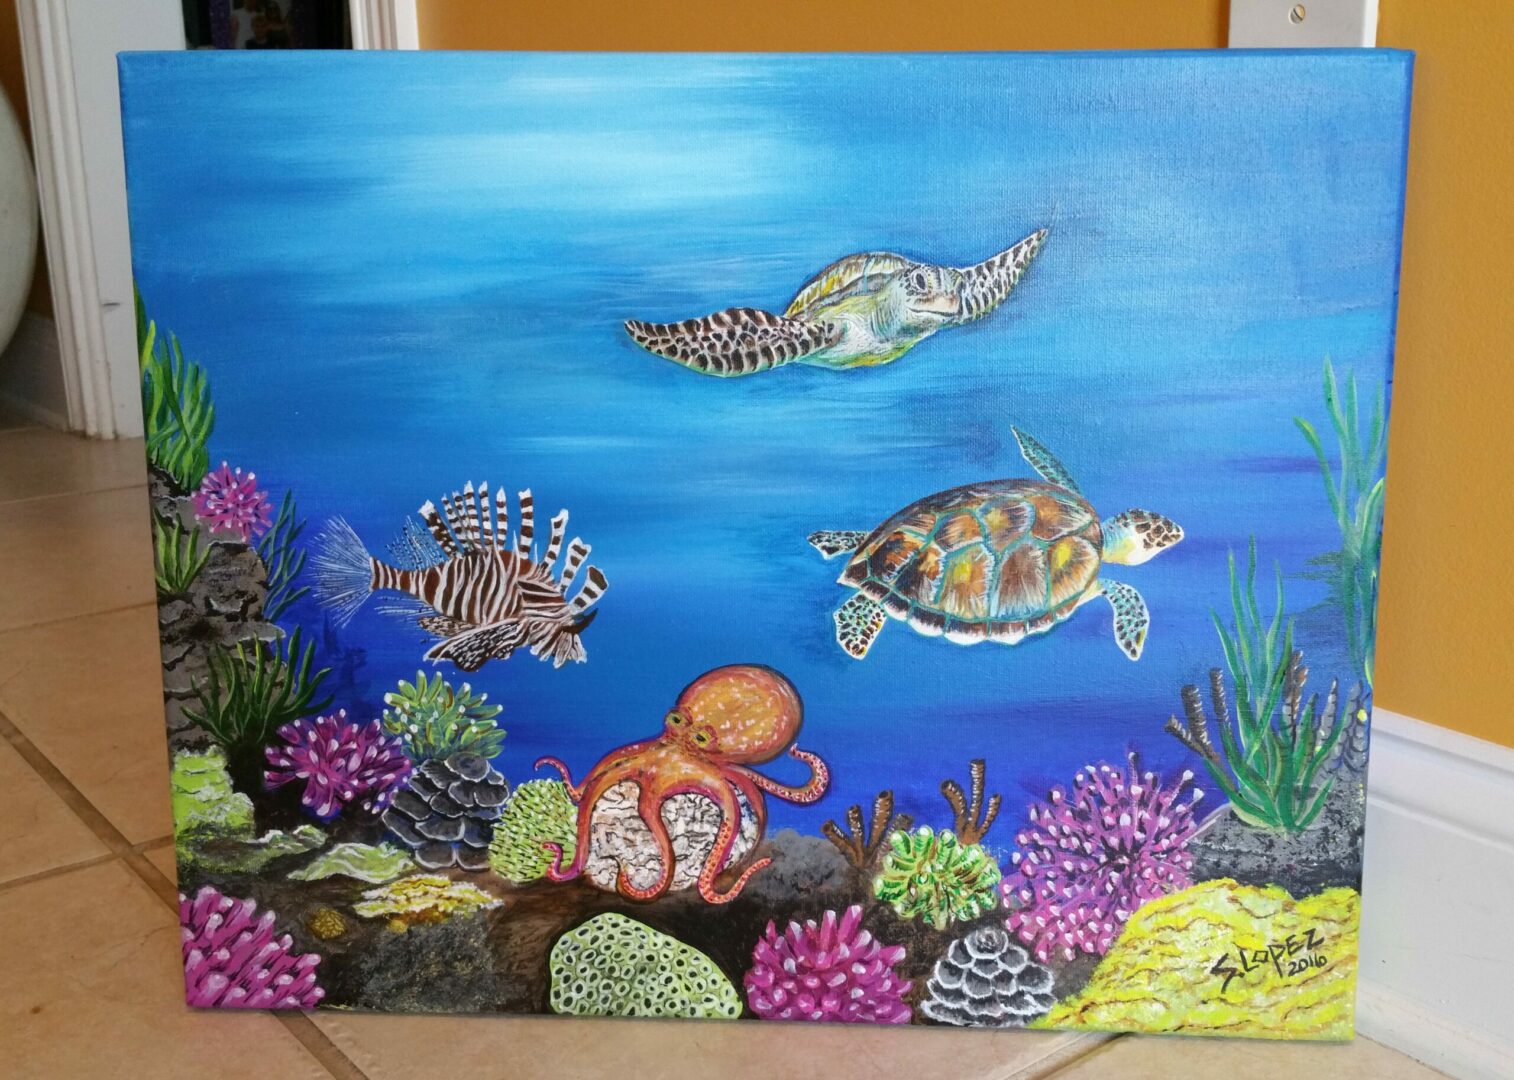 A painting of sea turtles swimming in the ocean.